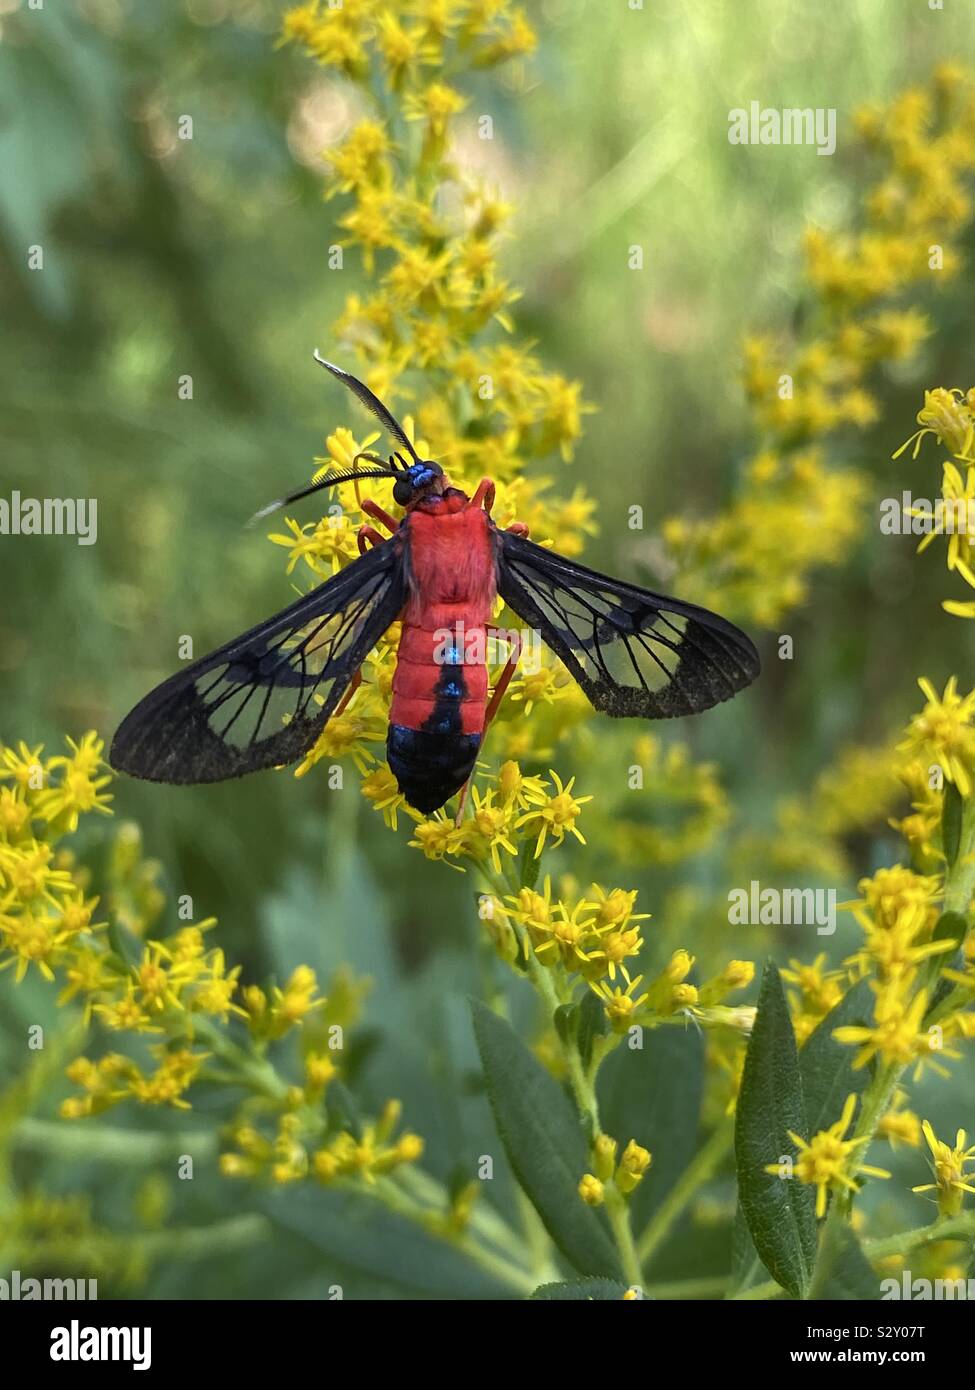 Scarlet red wasp moth on goldenrod plant blooming Stock Photo